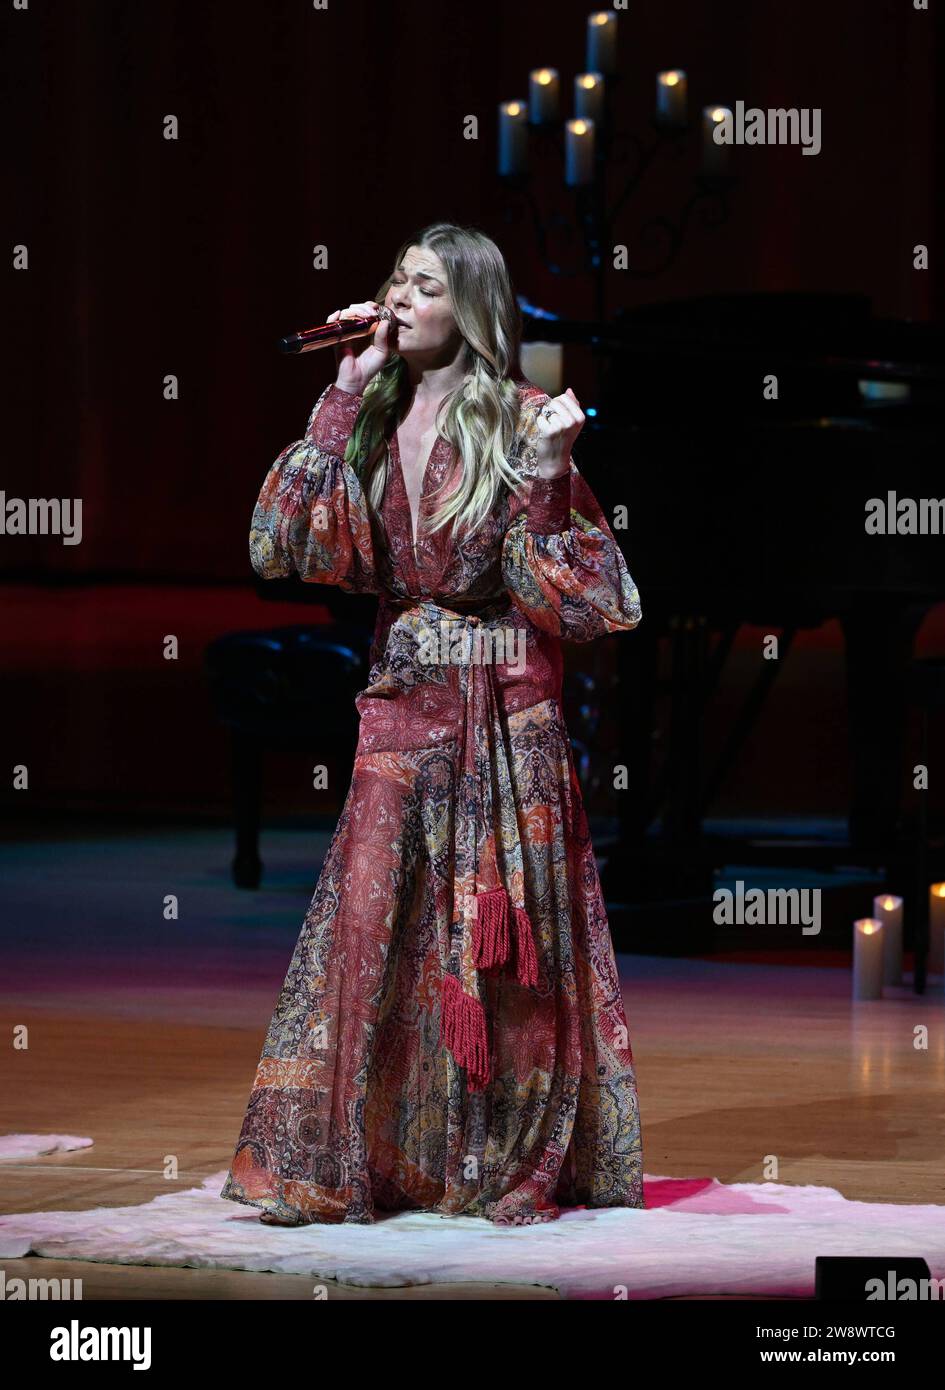 MIAMI, FL - DECEMBER 21: LeAnn Rimes performs during Joy: The Holiday Tour at the Knight Concert Hall on December 21, 2023 in Miami Florida. Copyright: xmpi04x Stock Photo